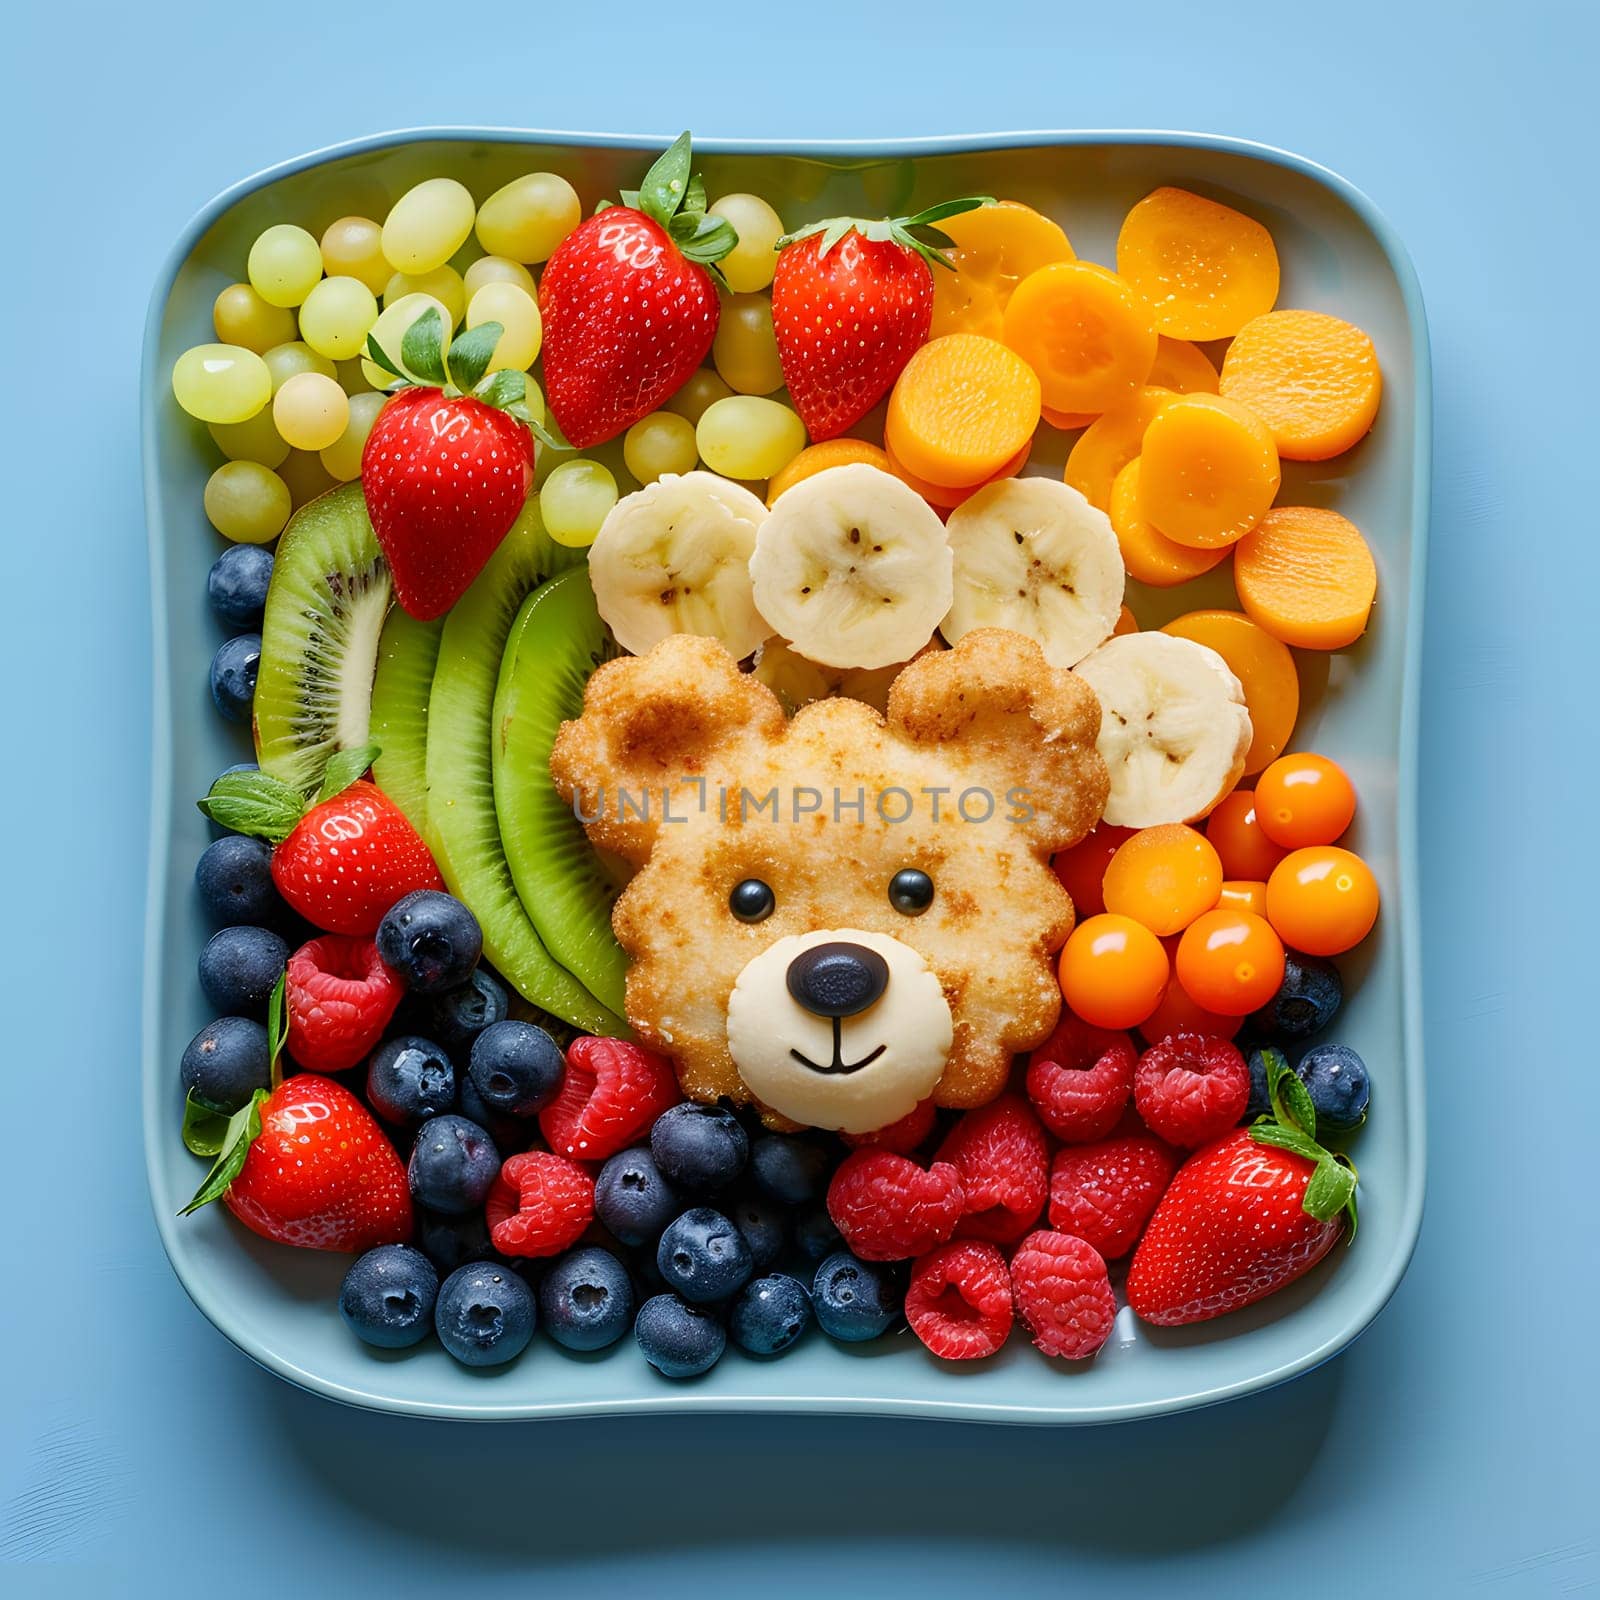 A creative centerpiece featuring a teddy bear made out of a variety of fruits and vegetables displayed on a plate. A fun and healthy option for a table setting